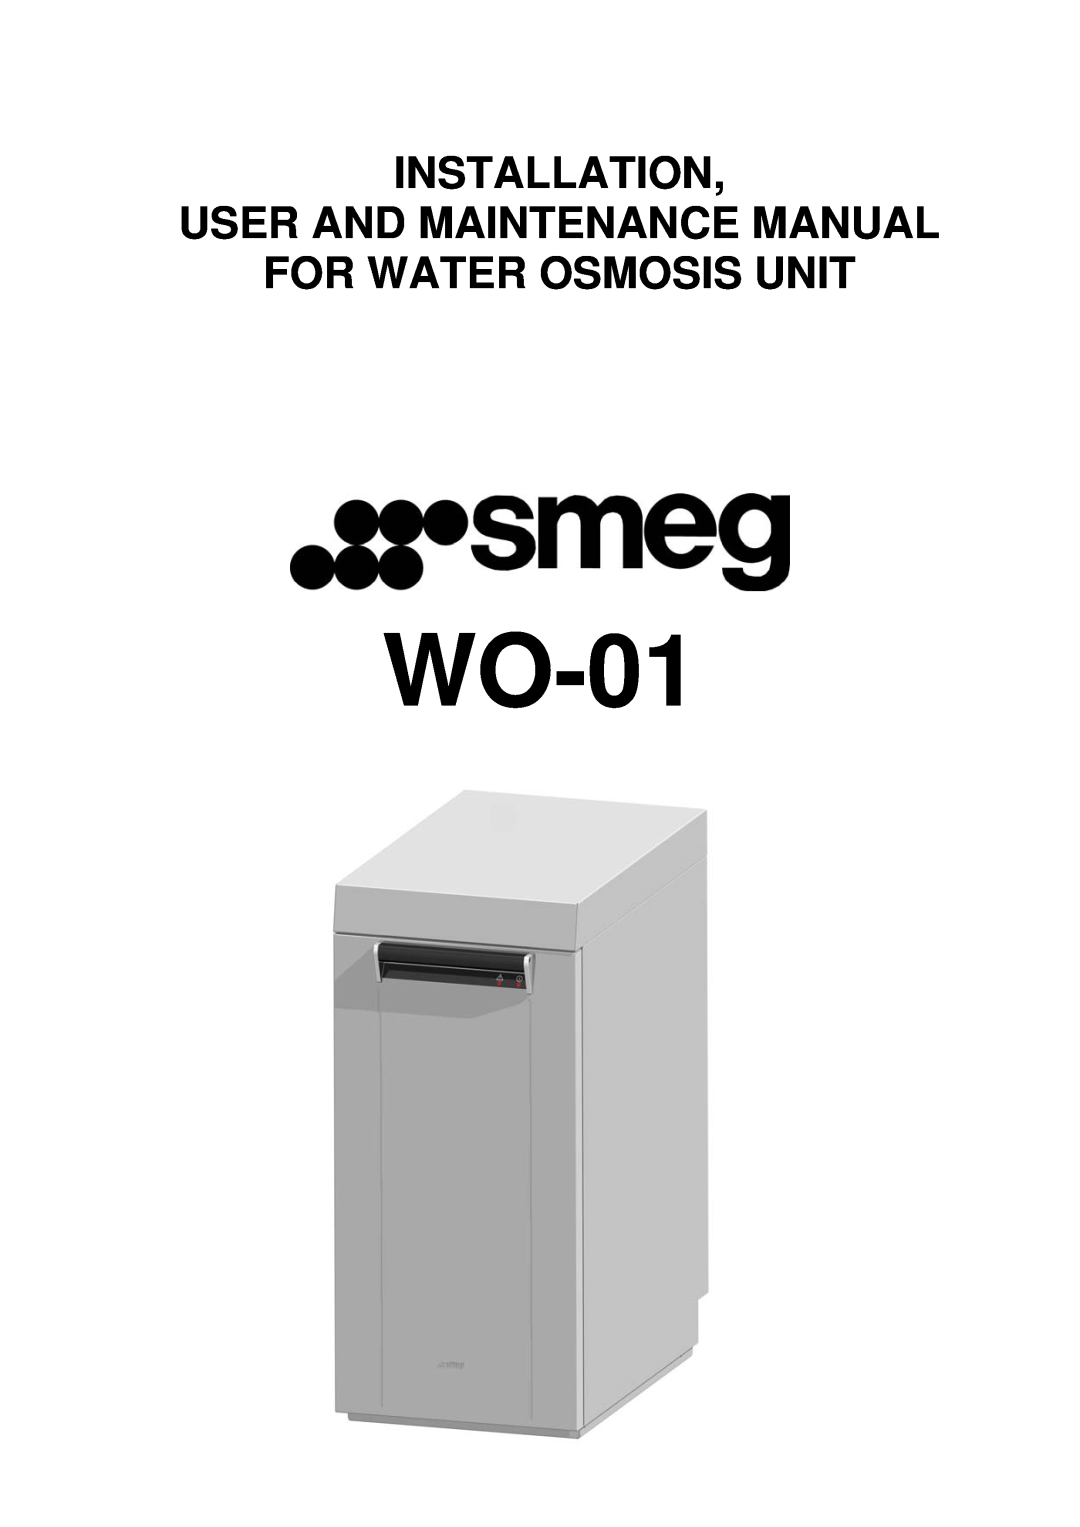 Smeg WO-01 manual Installation User And Maintenance Manual For Water Osmosis Unit 